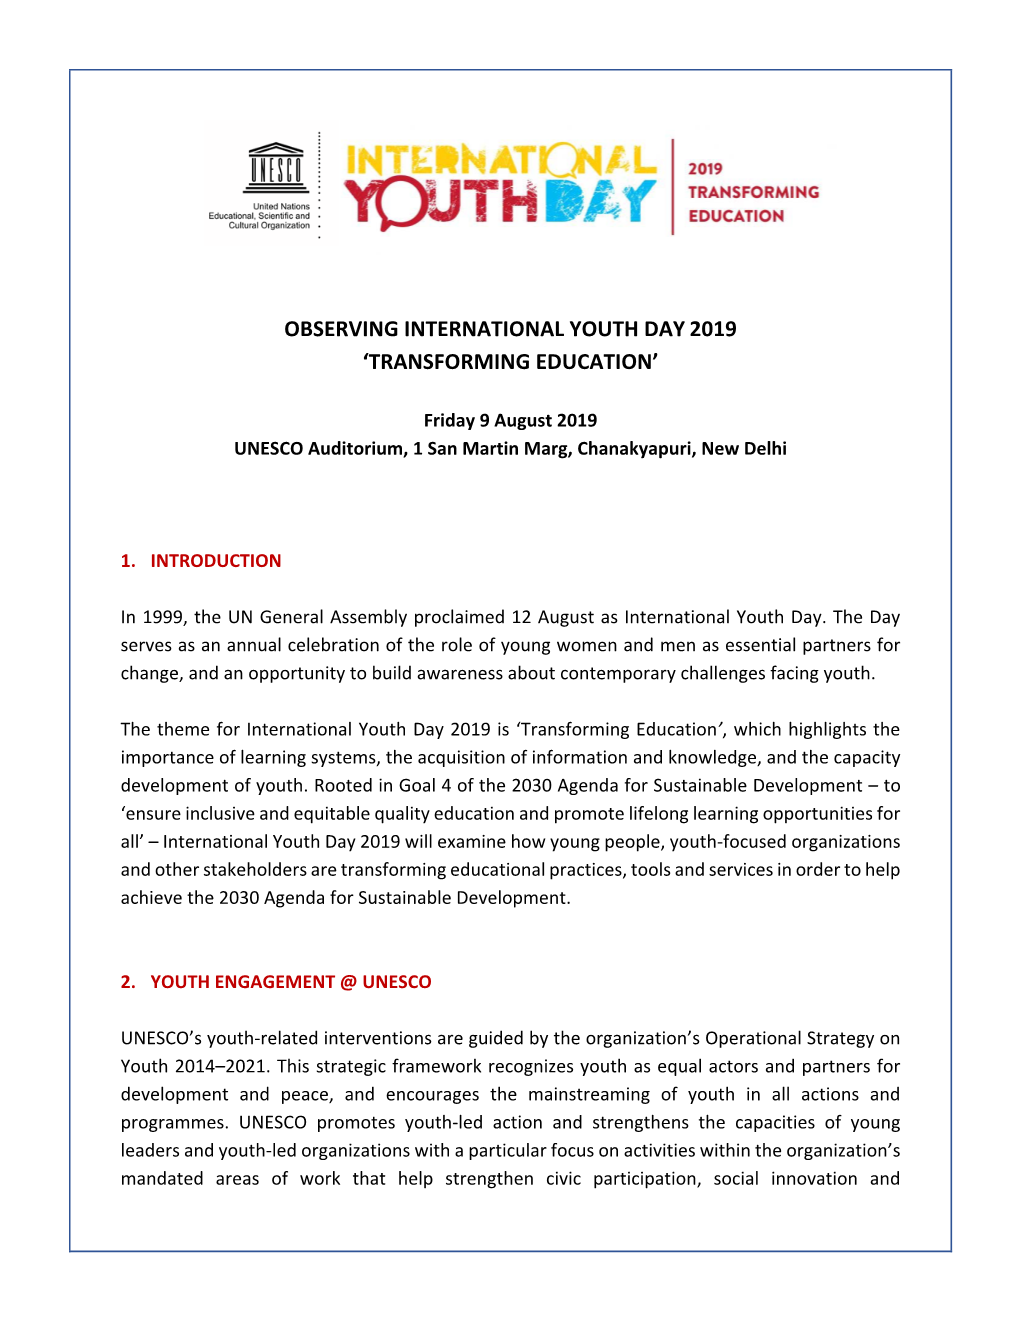 Observing International Youth Day 2019 'Transforming Education'